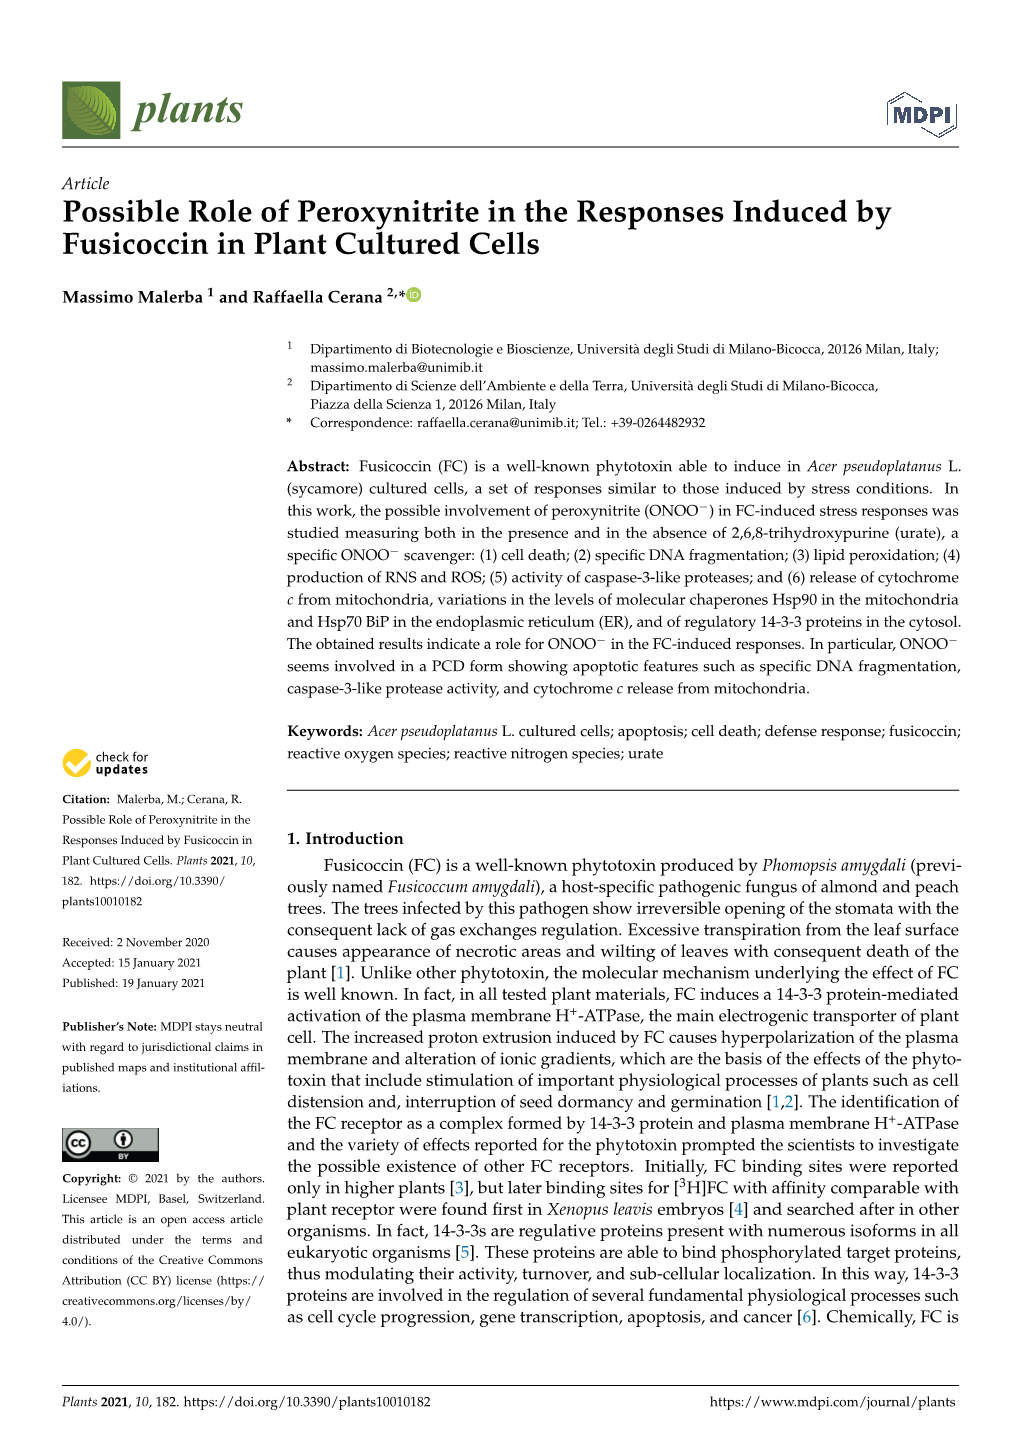 Possible Role of Peroxynitrite in the Responses Induced by Fusicoccin in Plant Cultured Cells